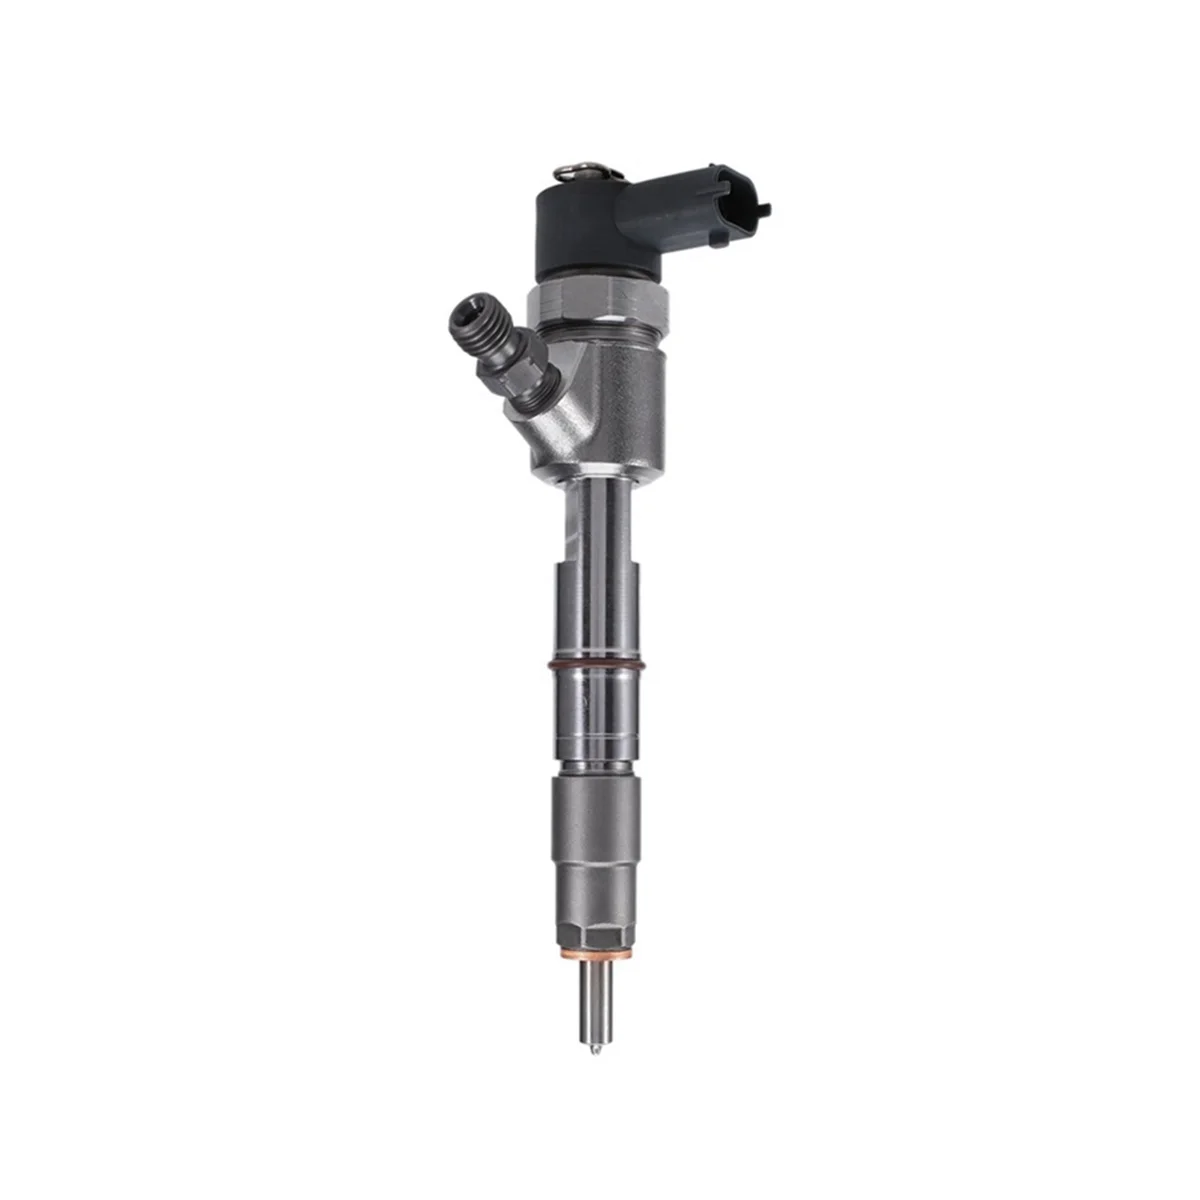 

0445110672 New Common Rail Diesel Fuel Injector Nozzle for ISUZU for Bosch